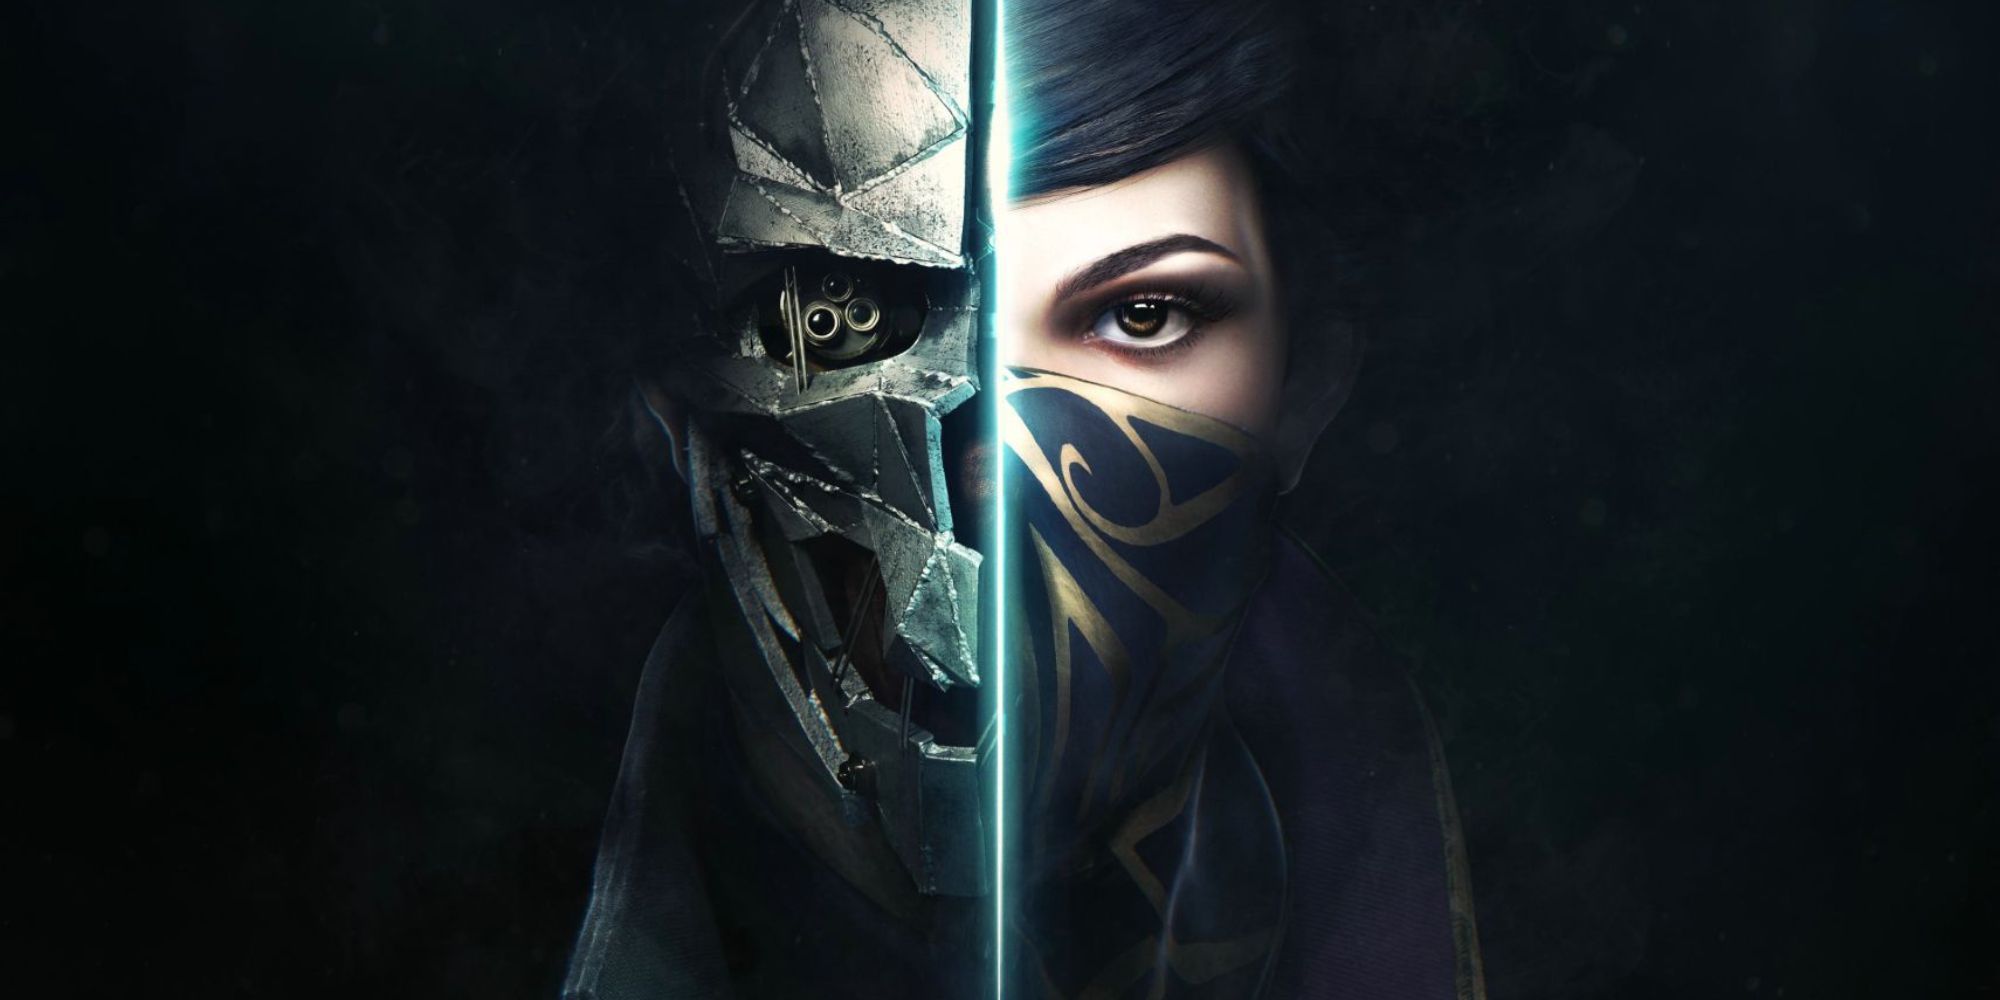 Dishonored 2 lets you play as Corvo or Emily, has dynamic endings